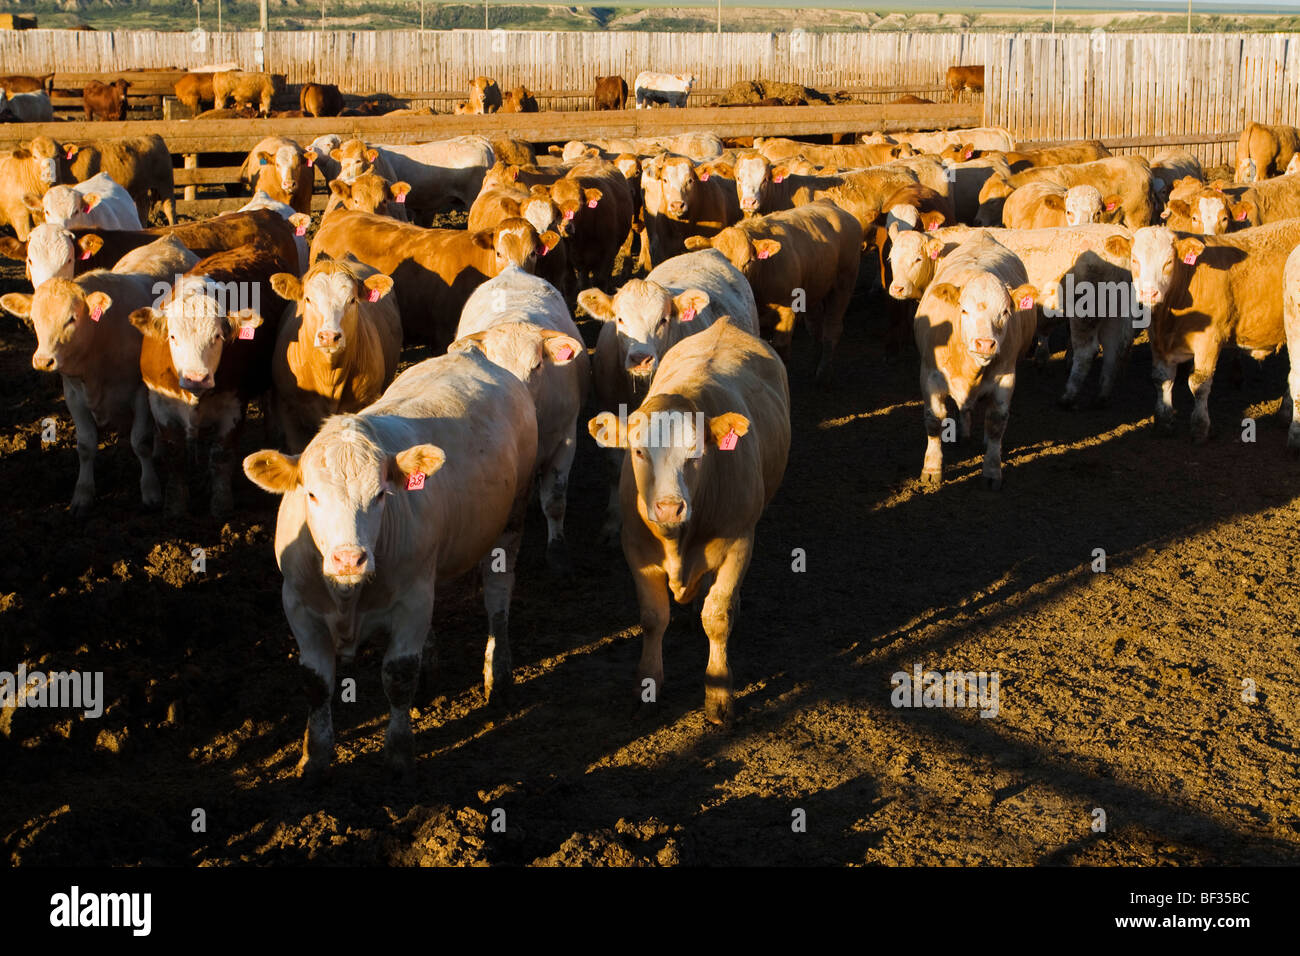 https://c8.alamy.com/comp/BF35BC/livestock-mixed-breeds-of-curious-beef-cattle-in-a-pen-at-a-large-BF35BC.jpg